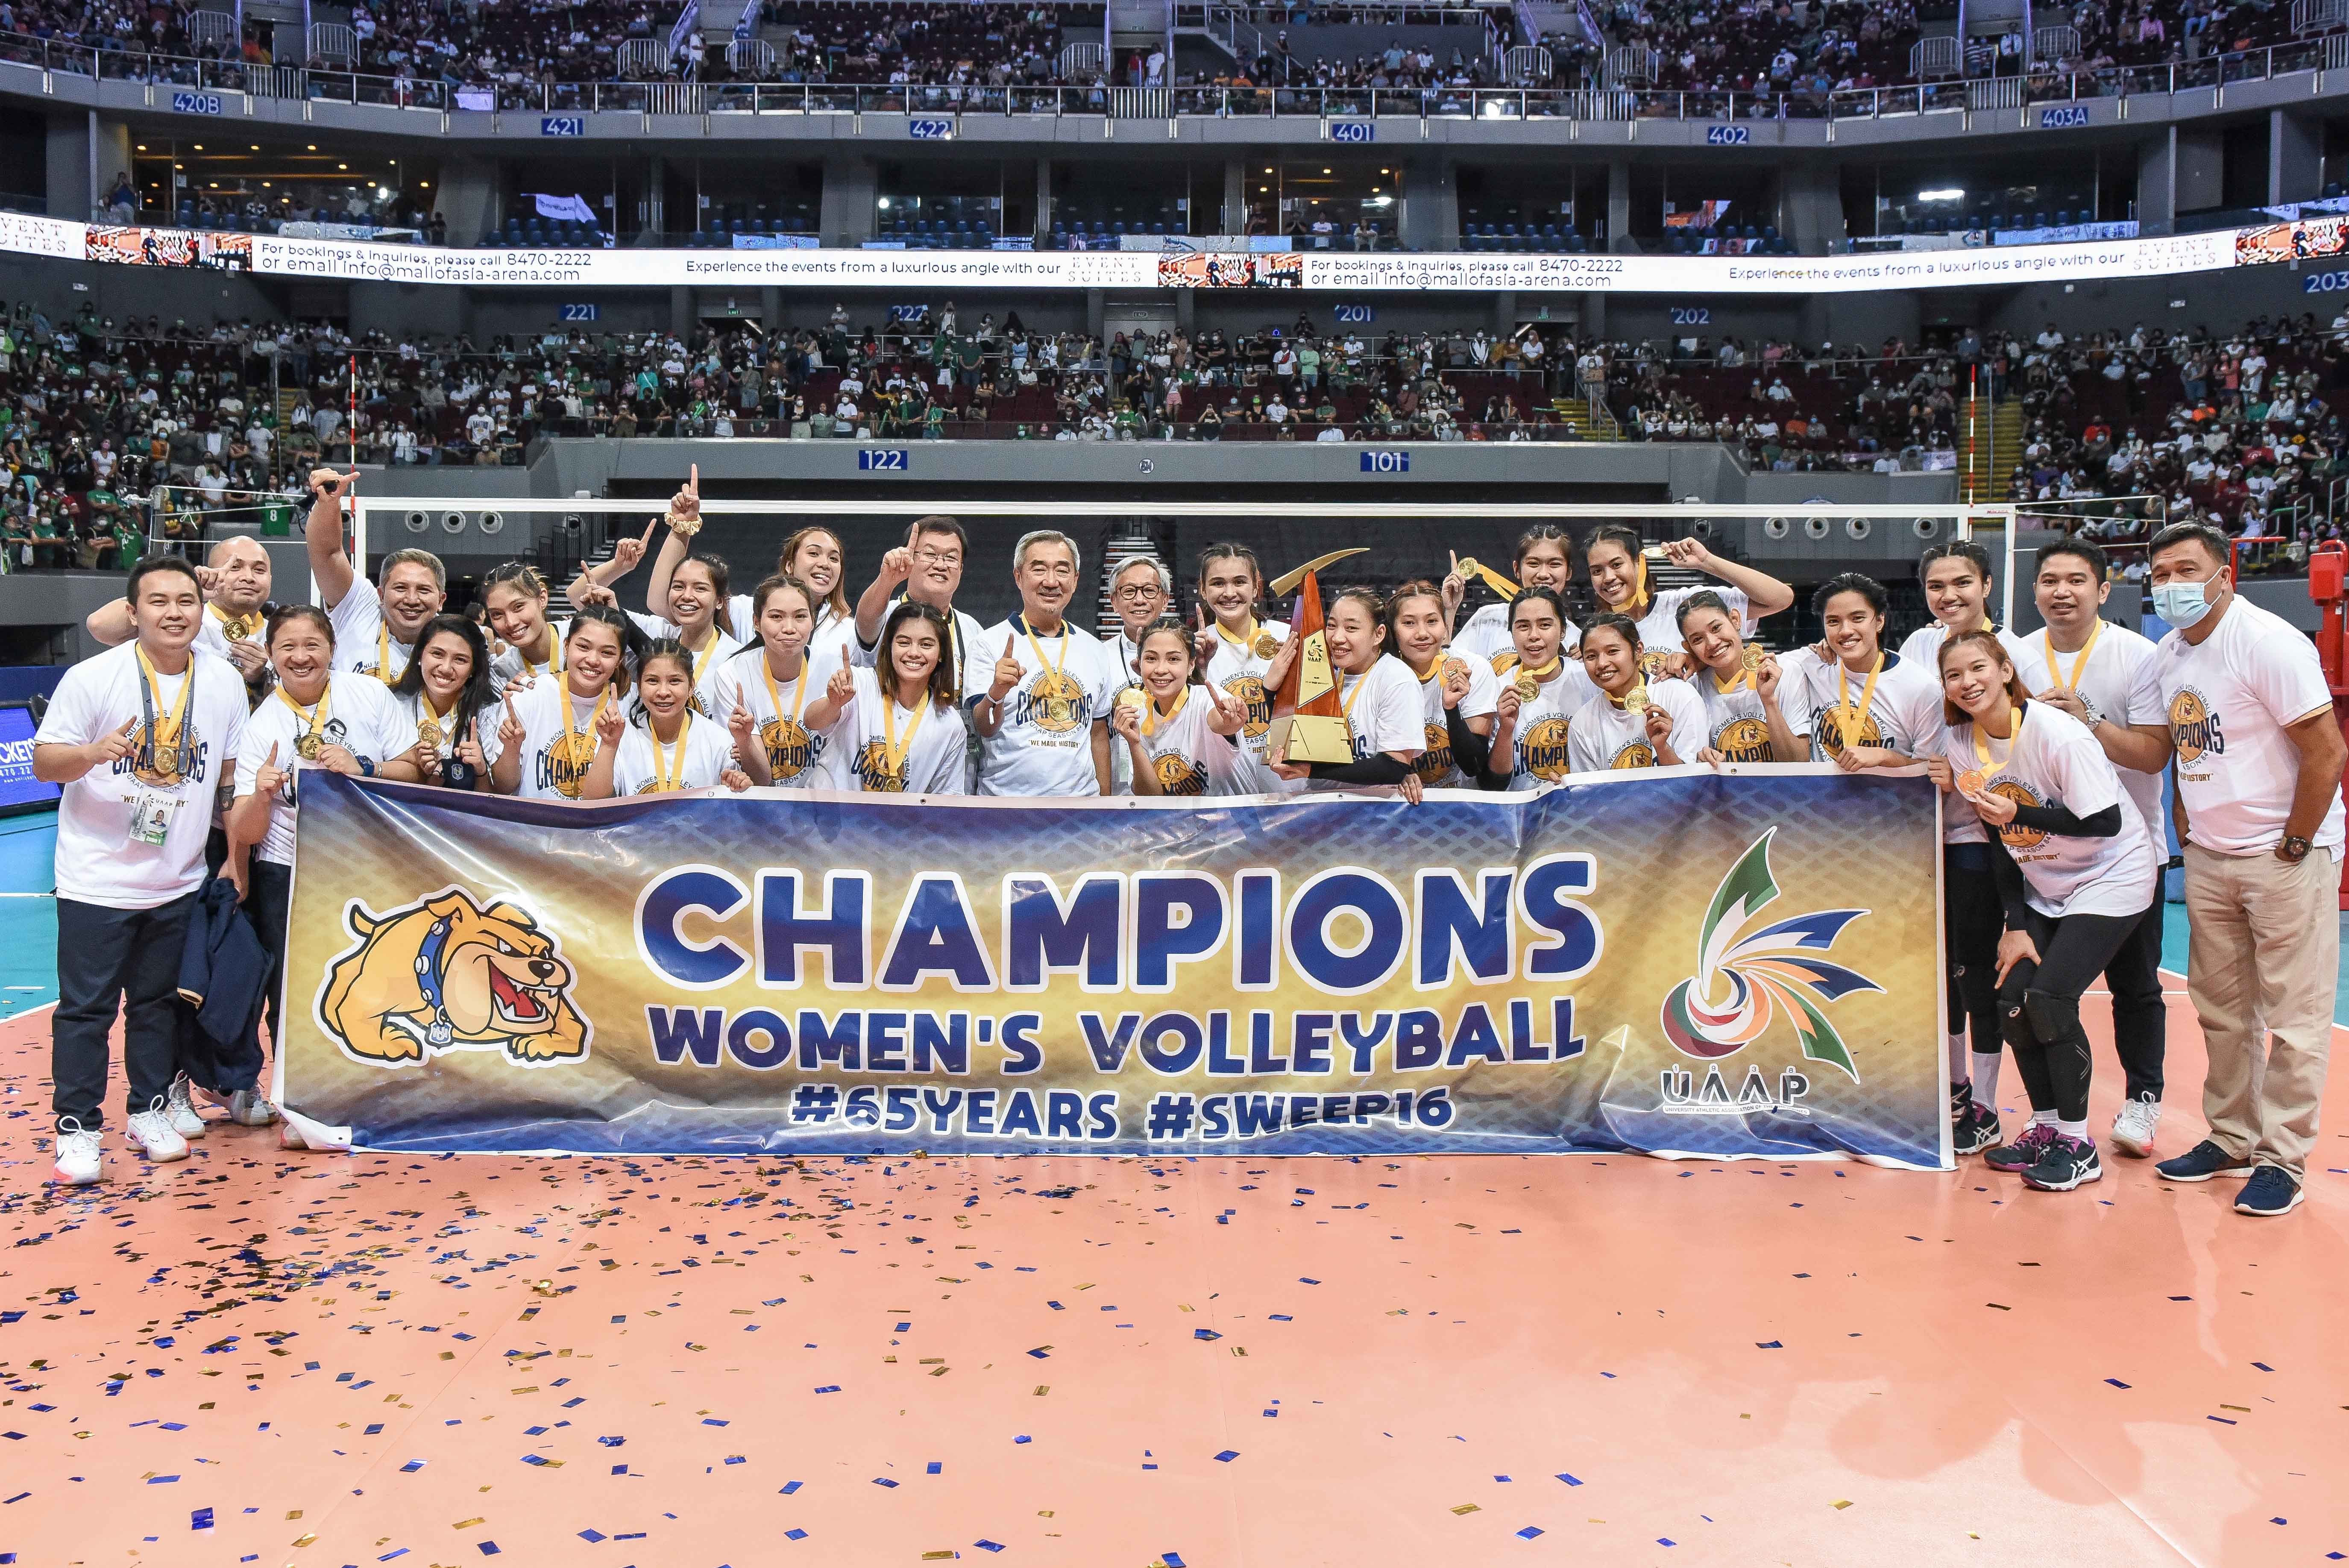 NU completes 16-0 sweep, clinches UAAP championship